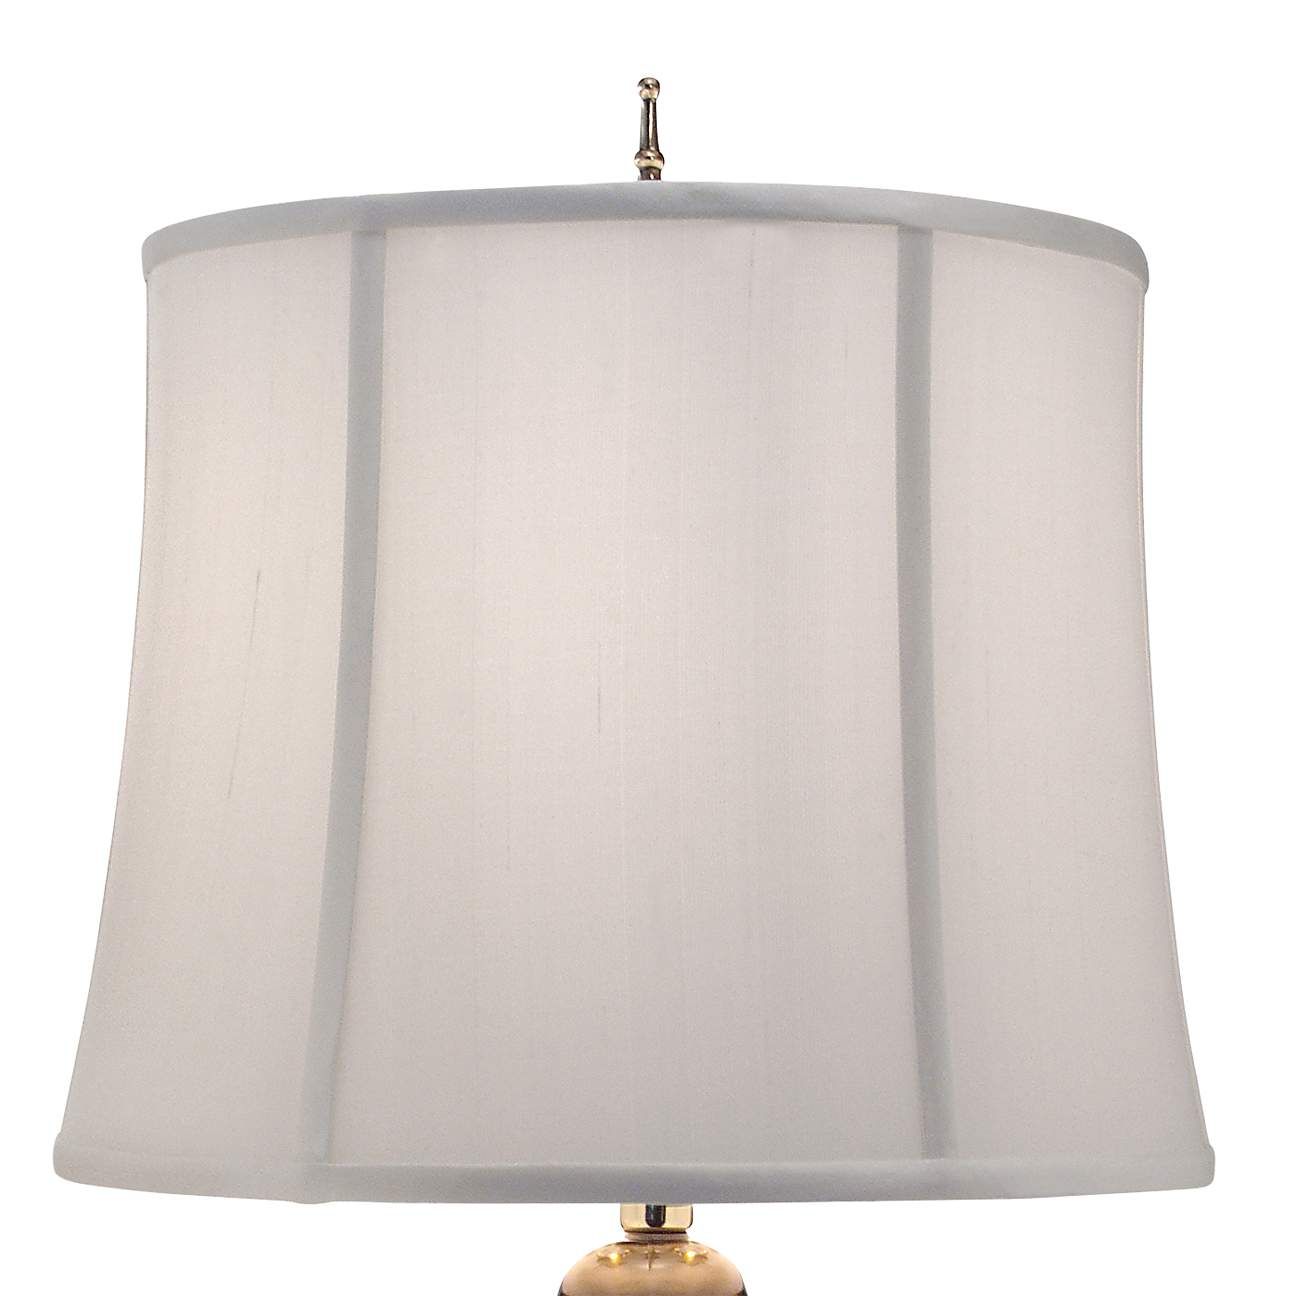 Stiffel Brass Finish Traditional Table Lamp with Dimmers | LampsPlus.com